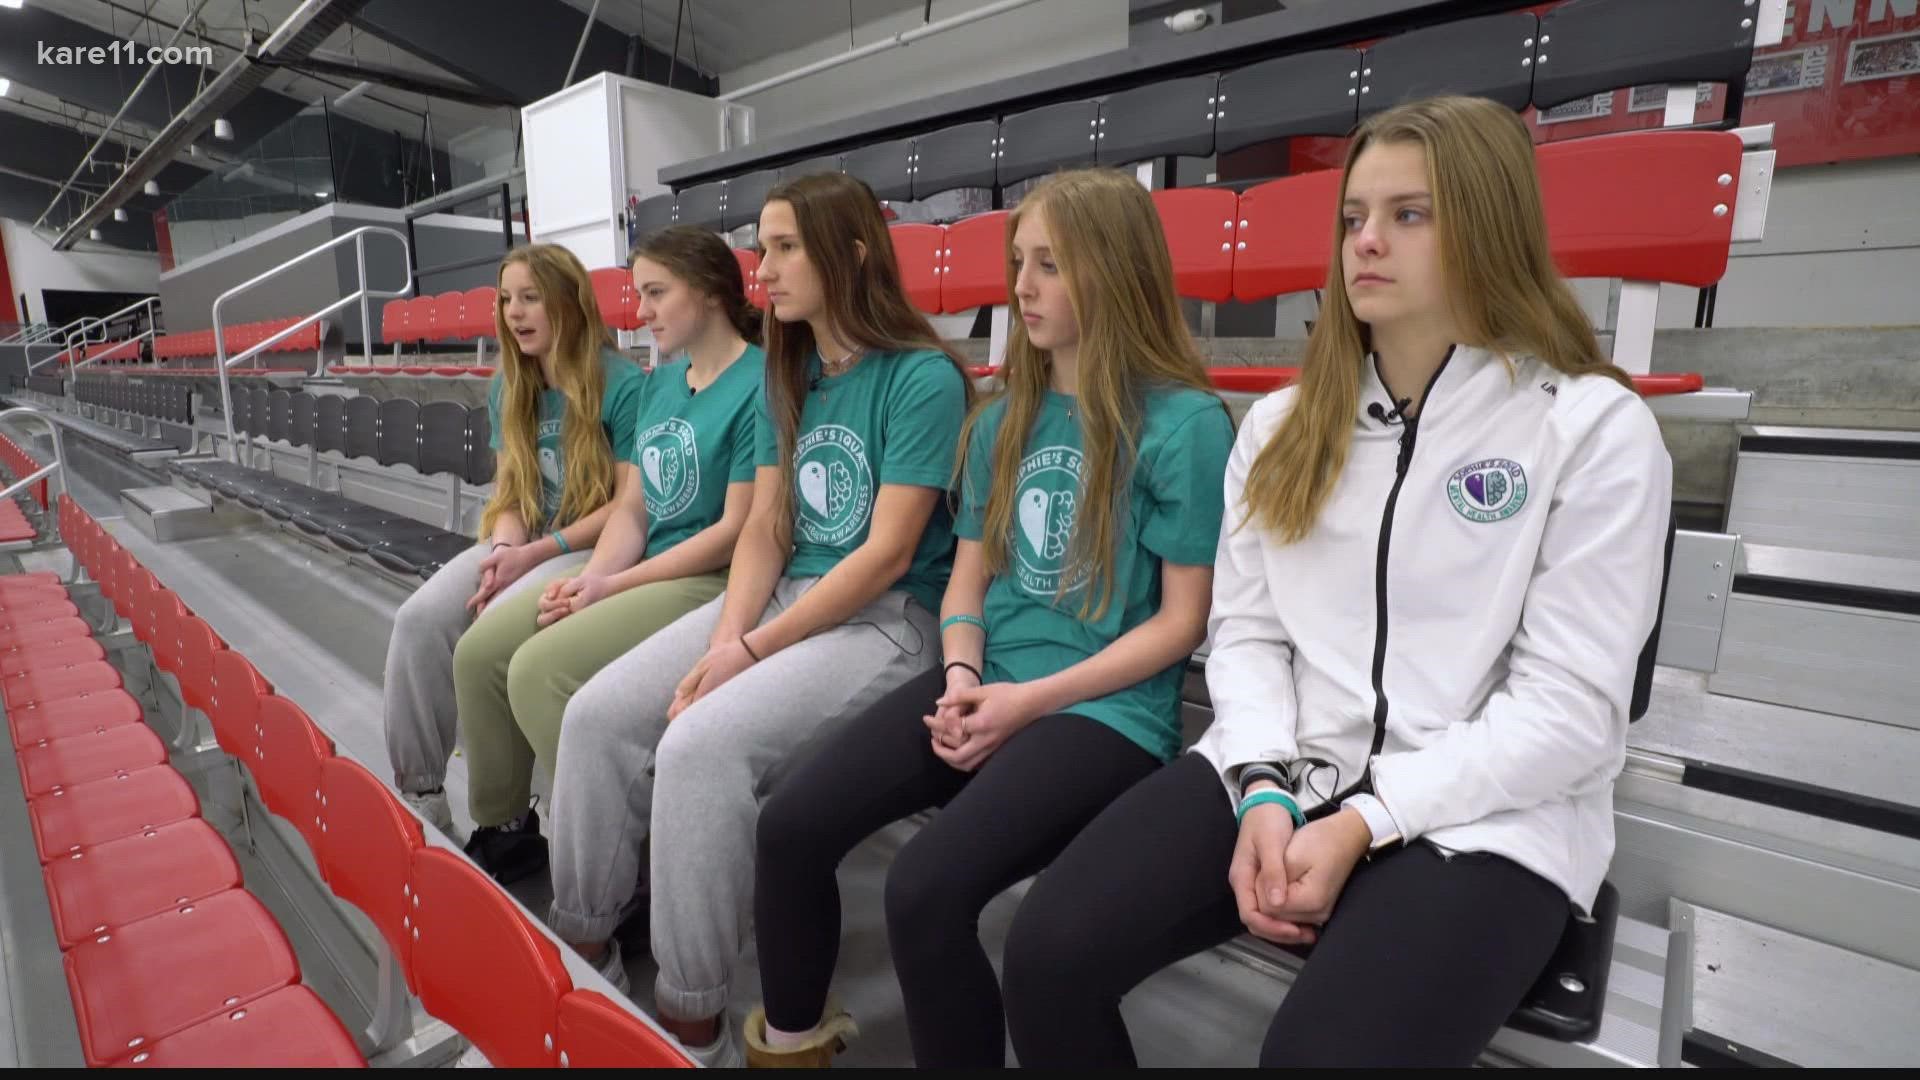 After the sudden and unexpected death of Sophie Wieland this summer, her teammates and coaches started raising awareness about mental health.